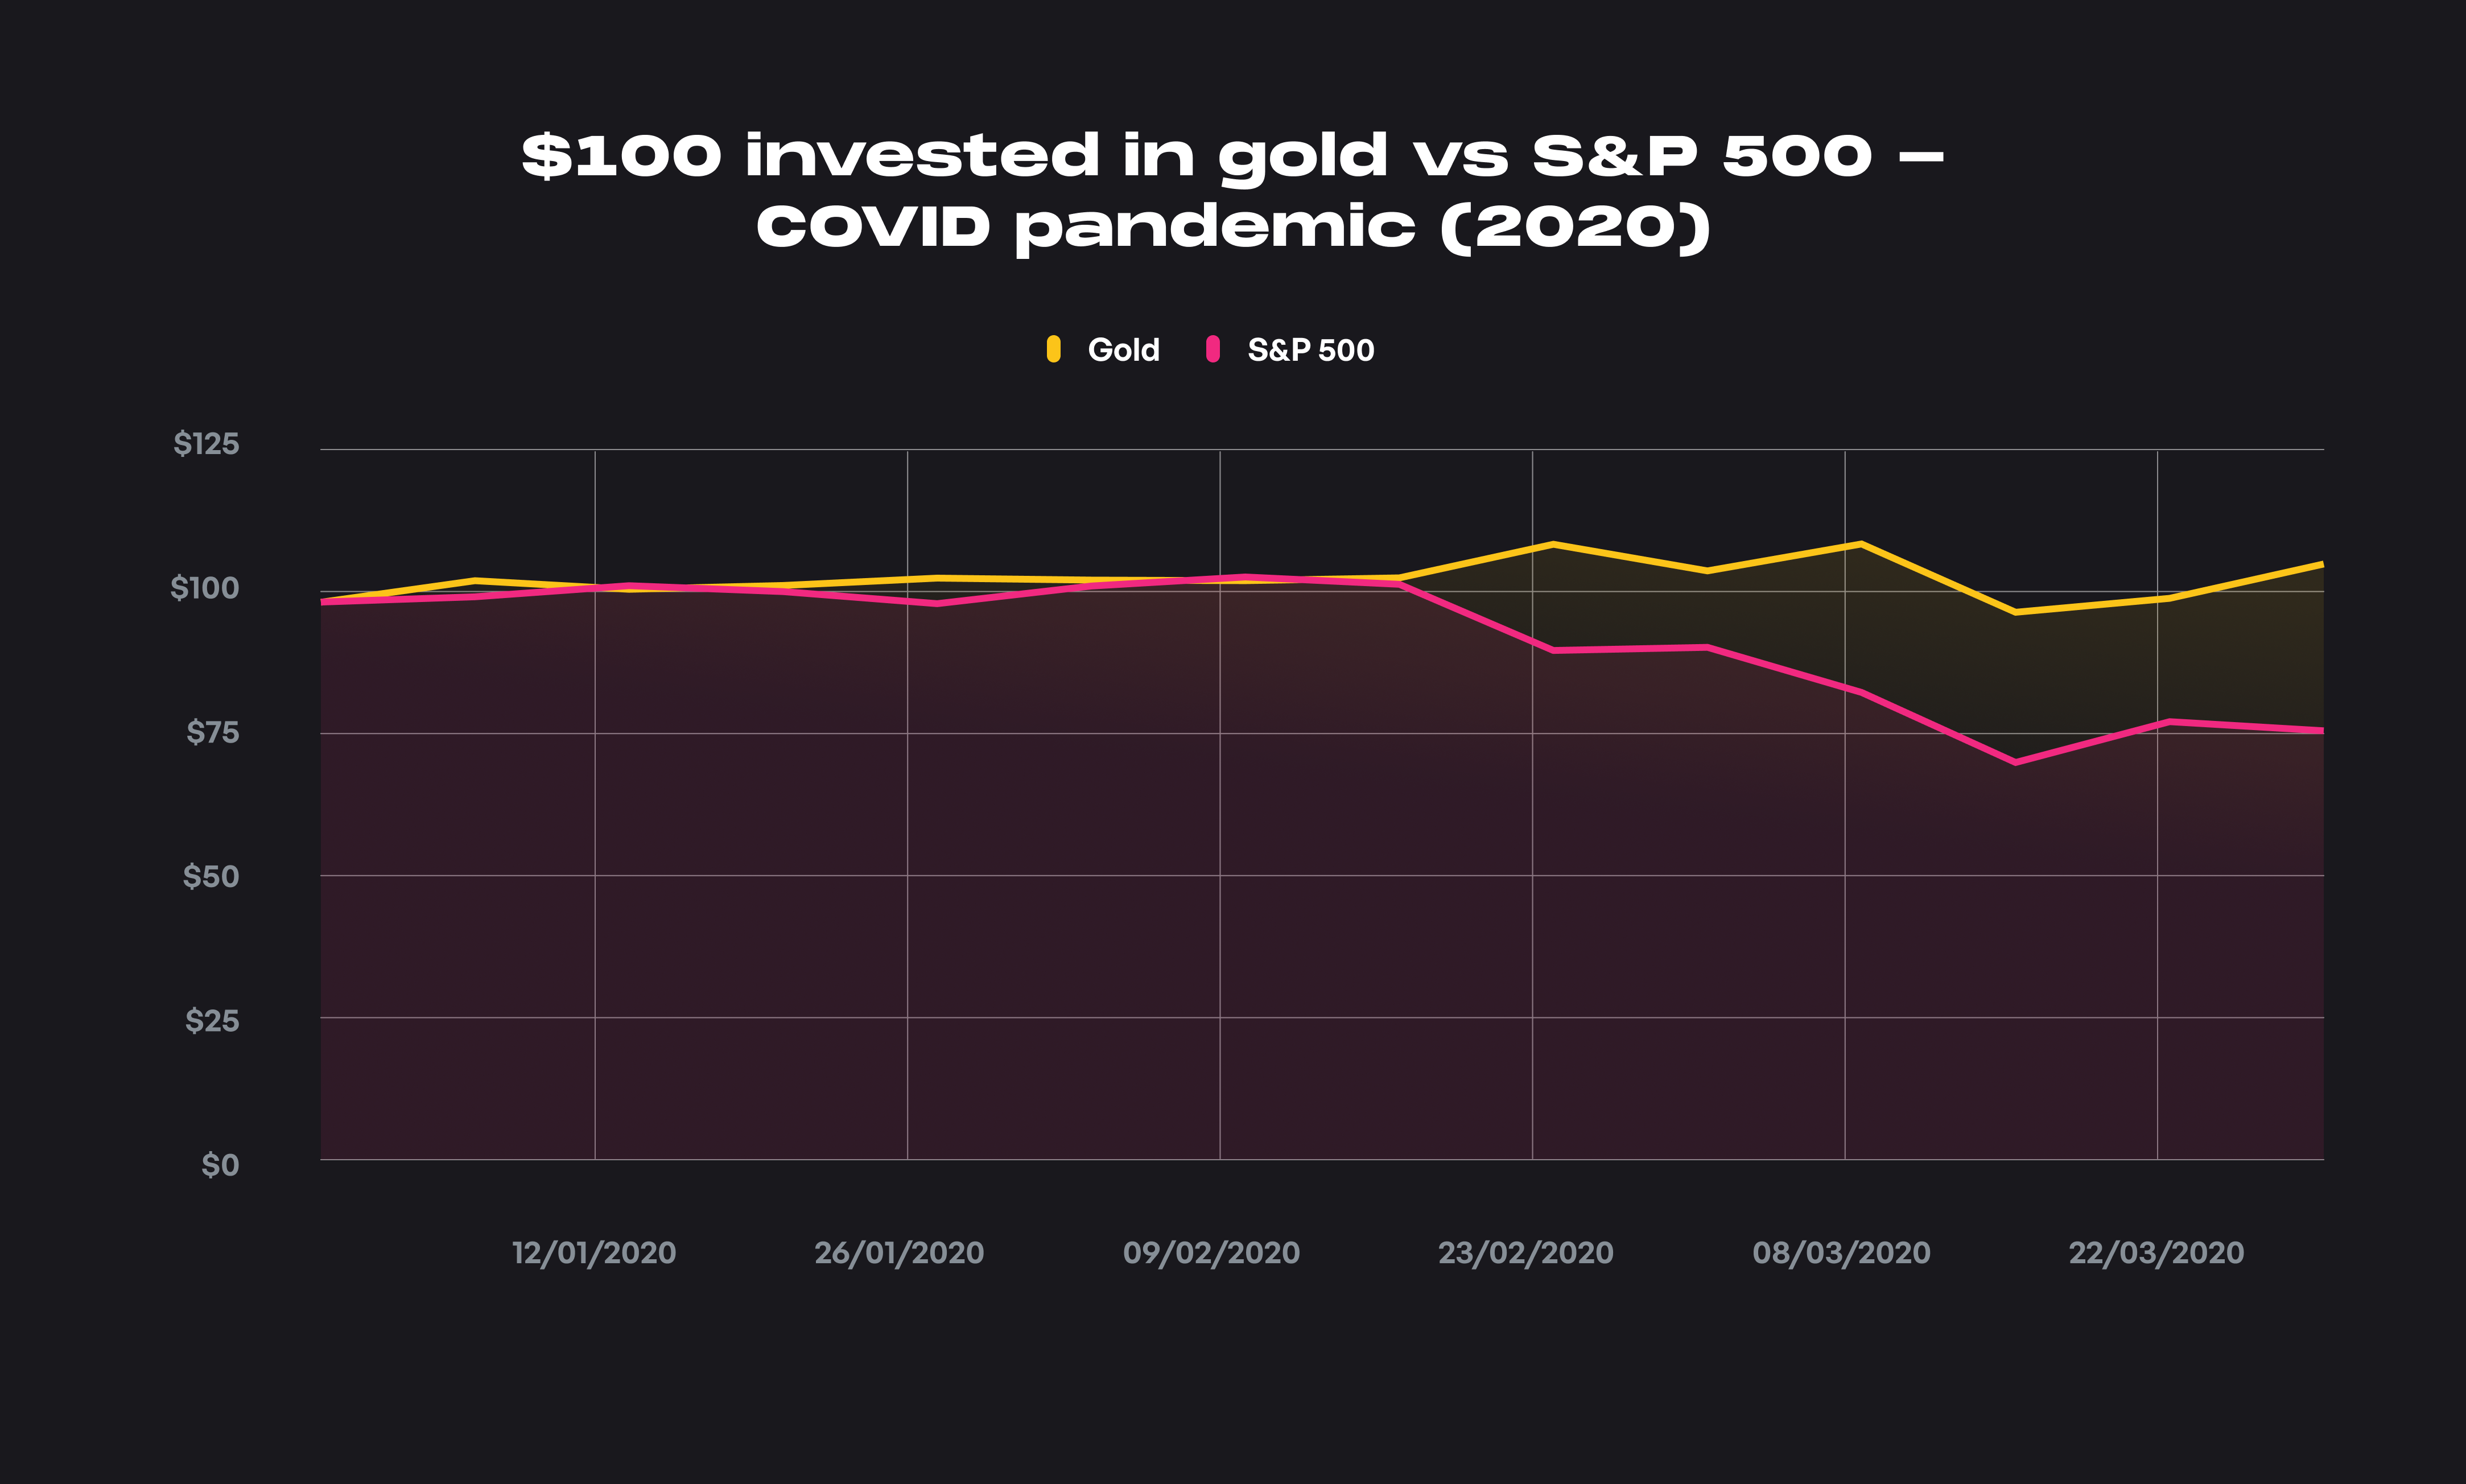 $100 invested in gold vs S&P 500 - Do...